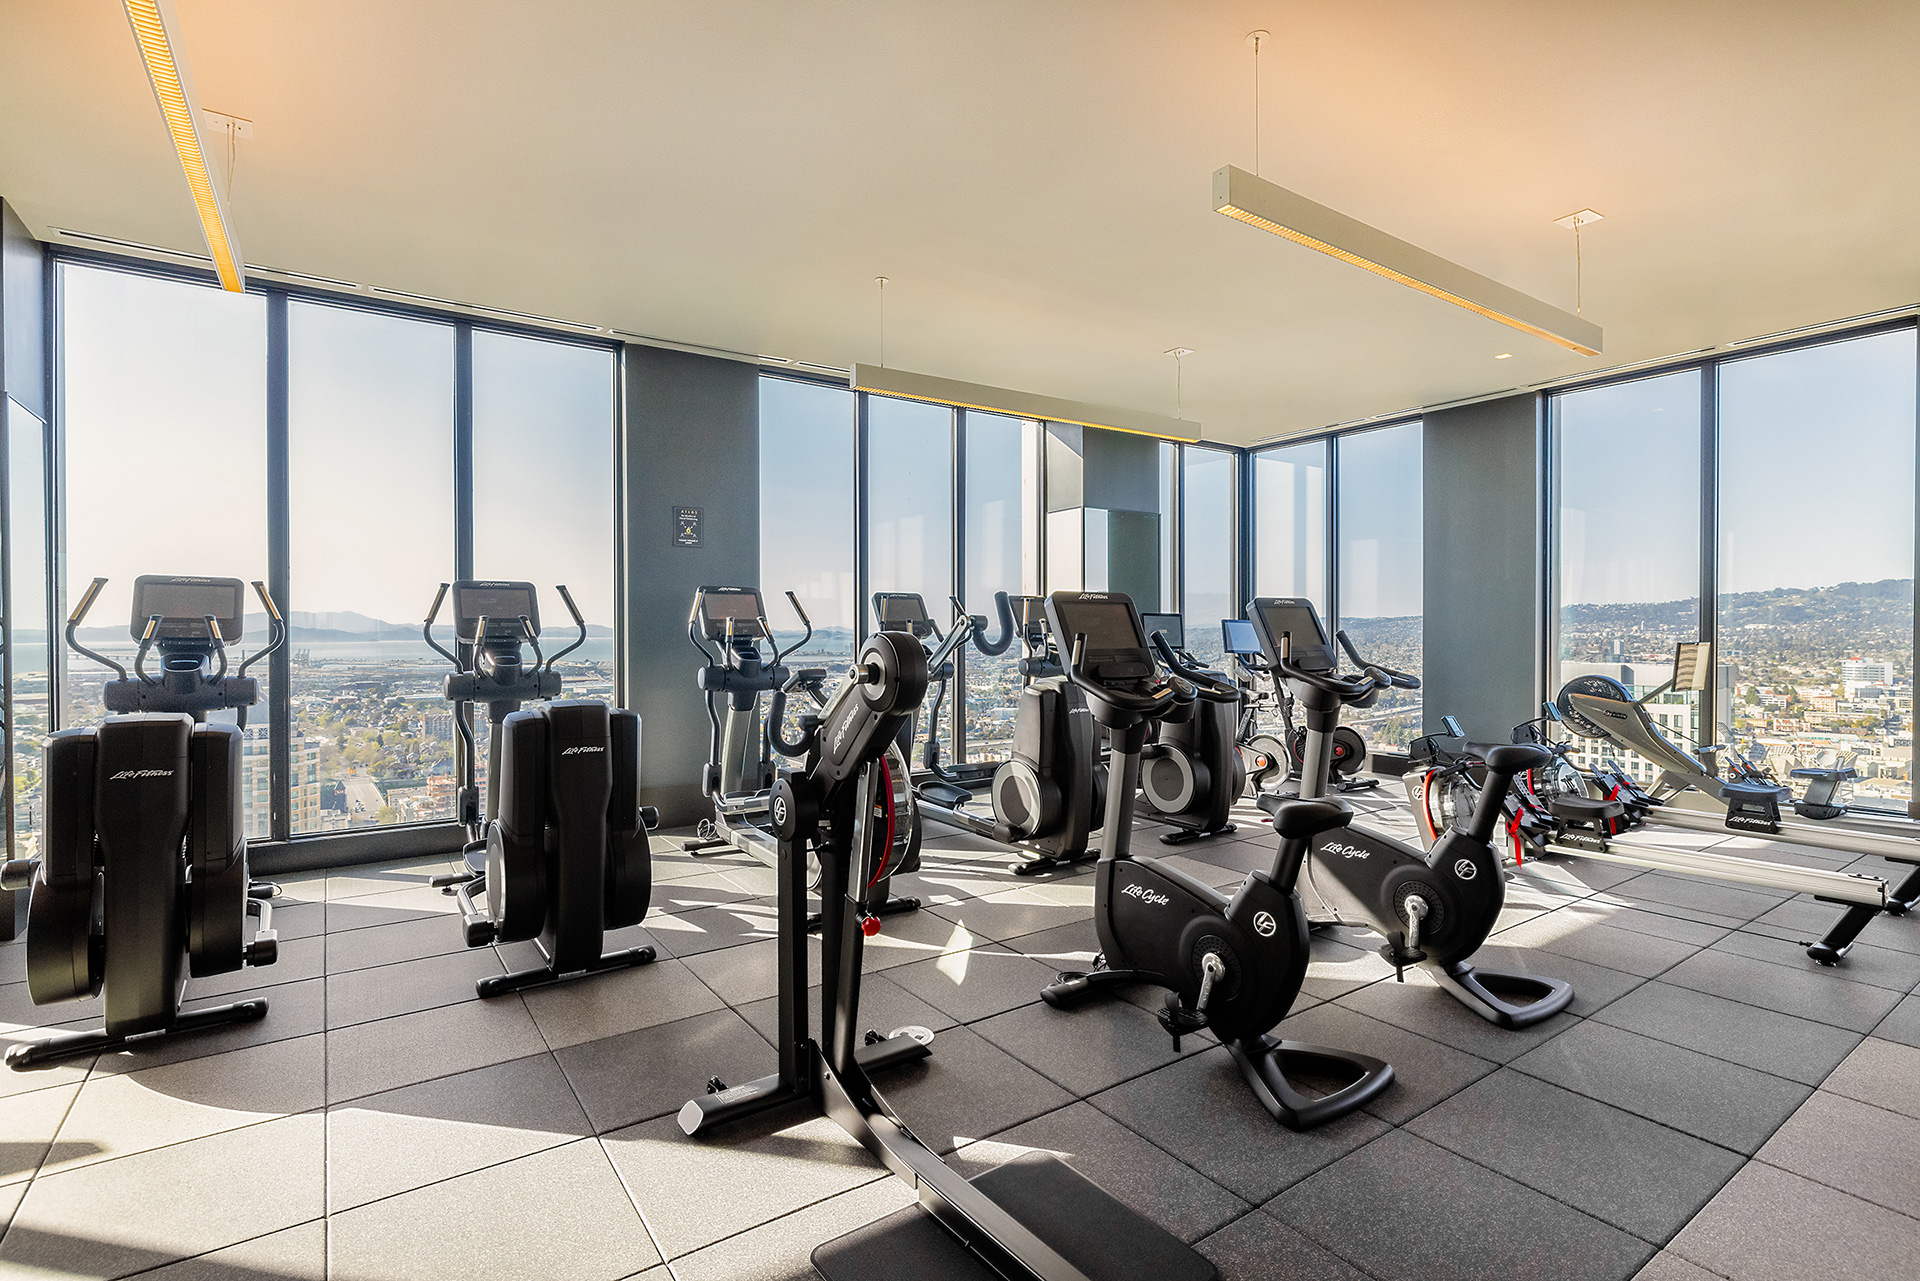 Interior gym with floor to ceiling windows and exercise machines